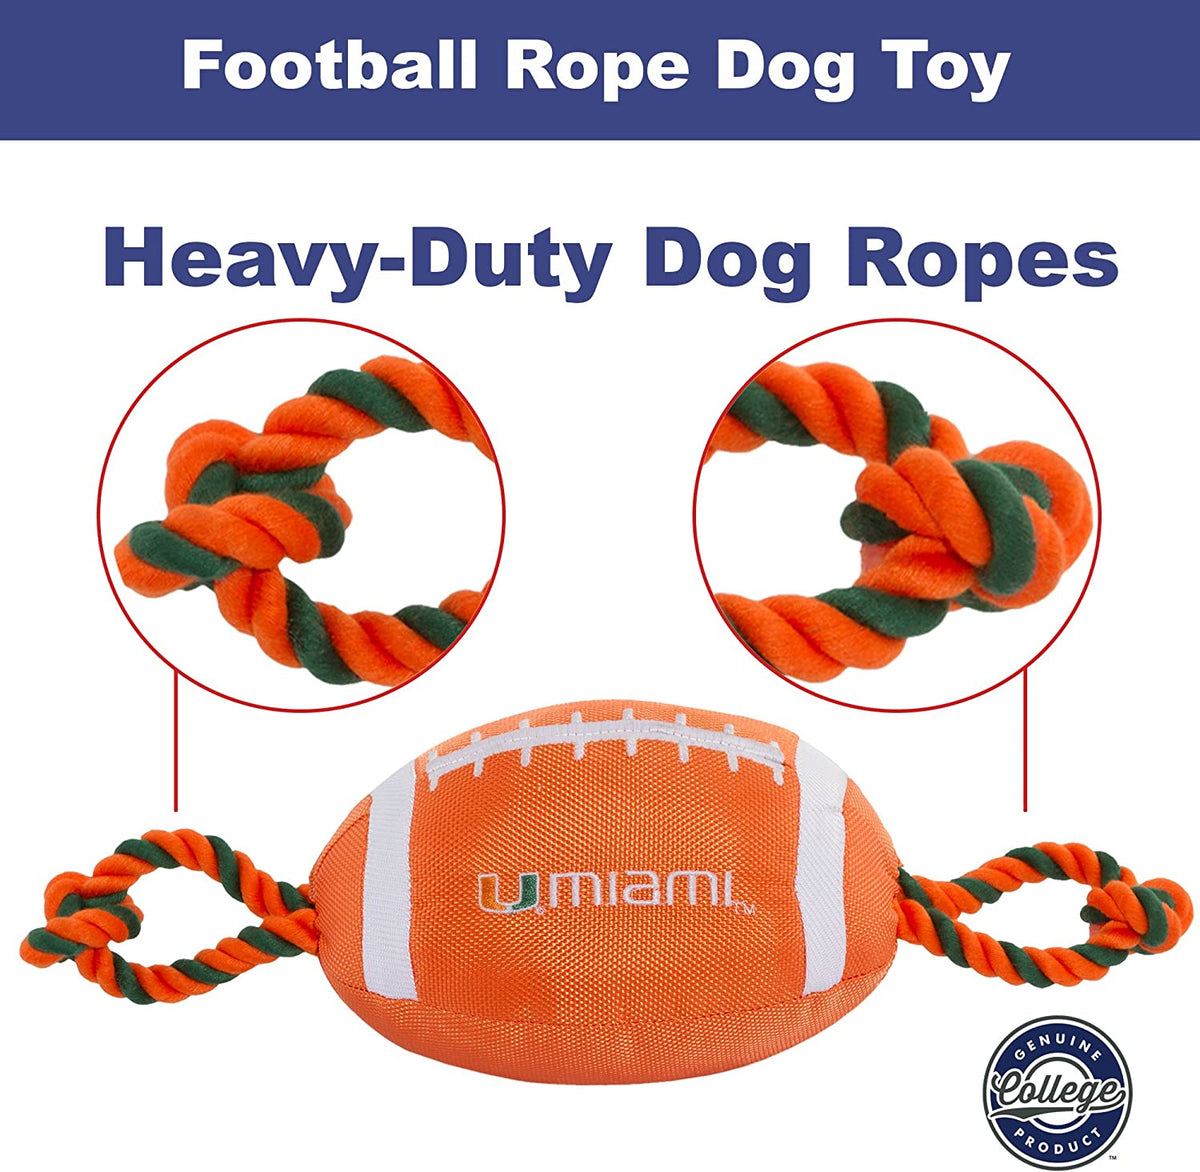 MIA Hurricanes Football Rope Toys - 3 Red Rovers